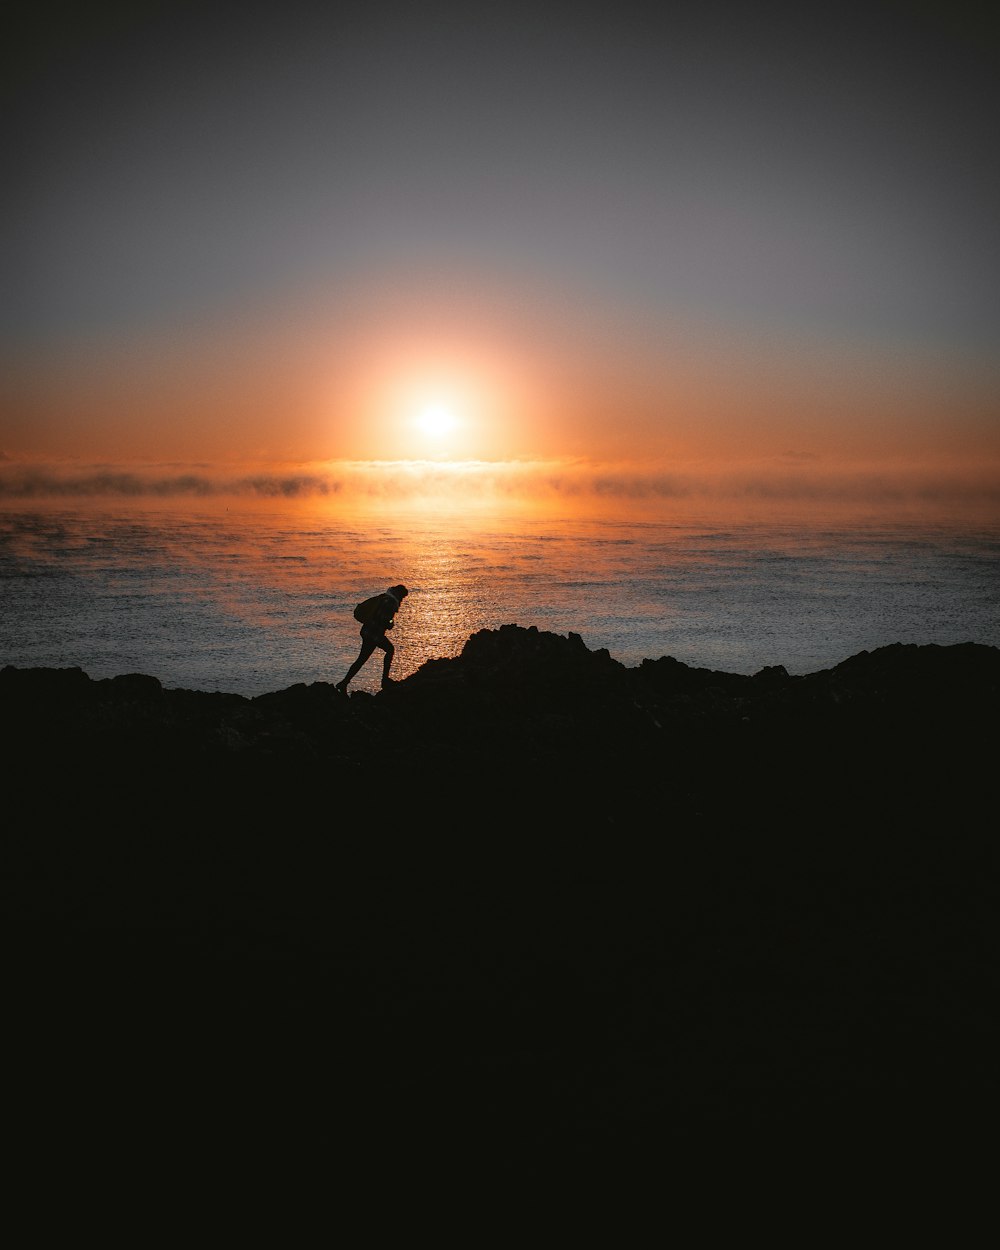 silhouette of person standing on rock near body of water during sunset